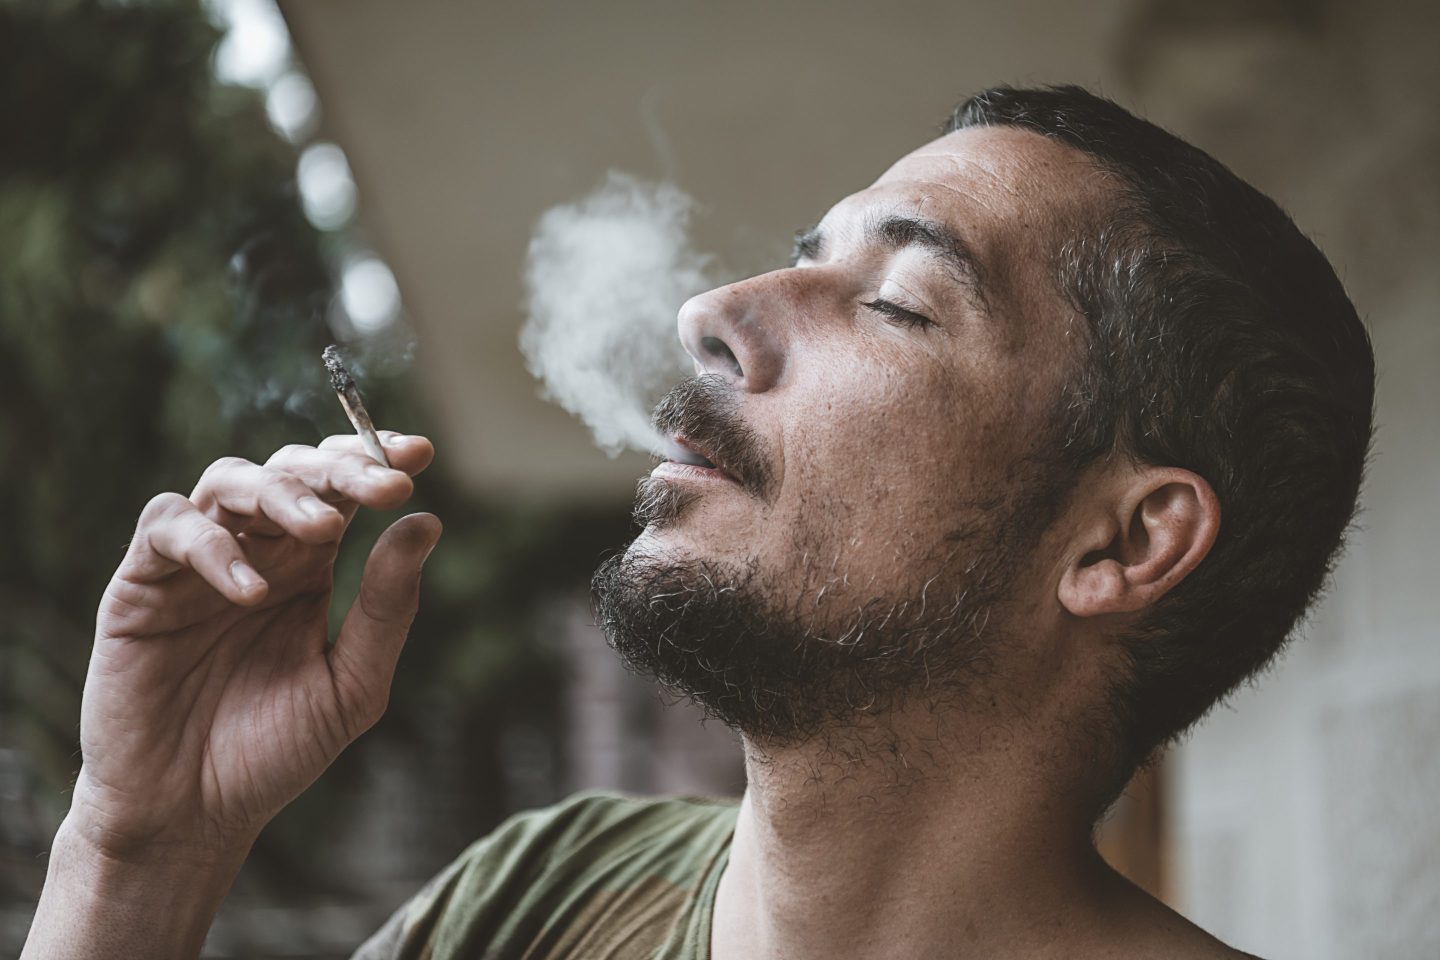 Scientists aren’t sure if cannabis use leads to anxiety, or if anxiety symptoms in many cannabis users are pre-existing but underdiagnosed, prompting users’ attempt to self-medicate.